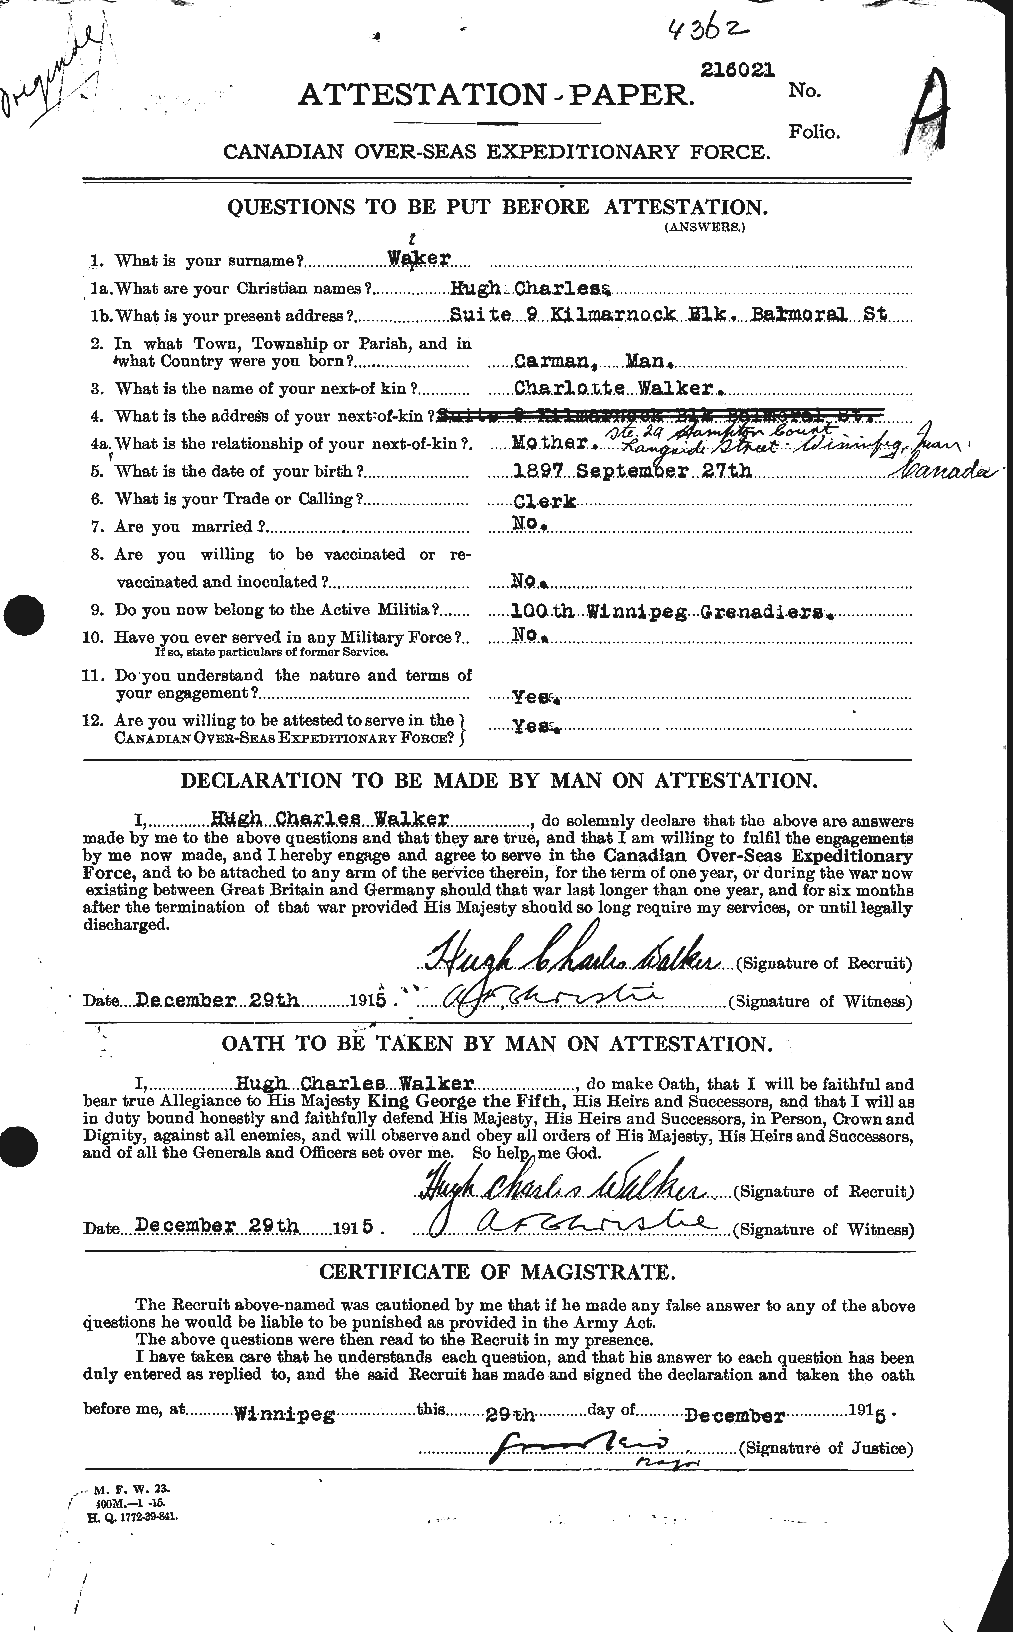 Personnel Records of the First World War - CEF 652933a